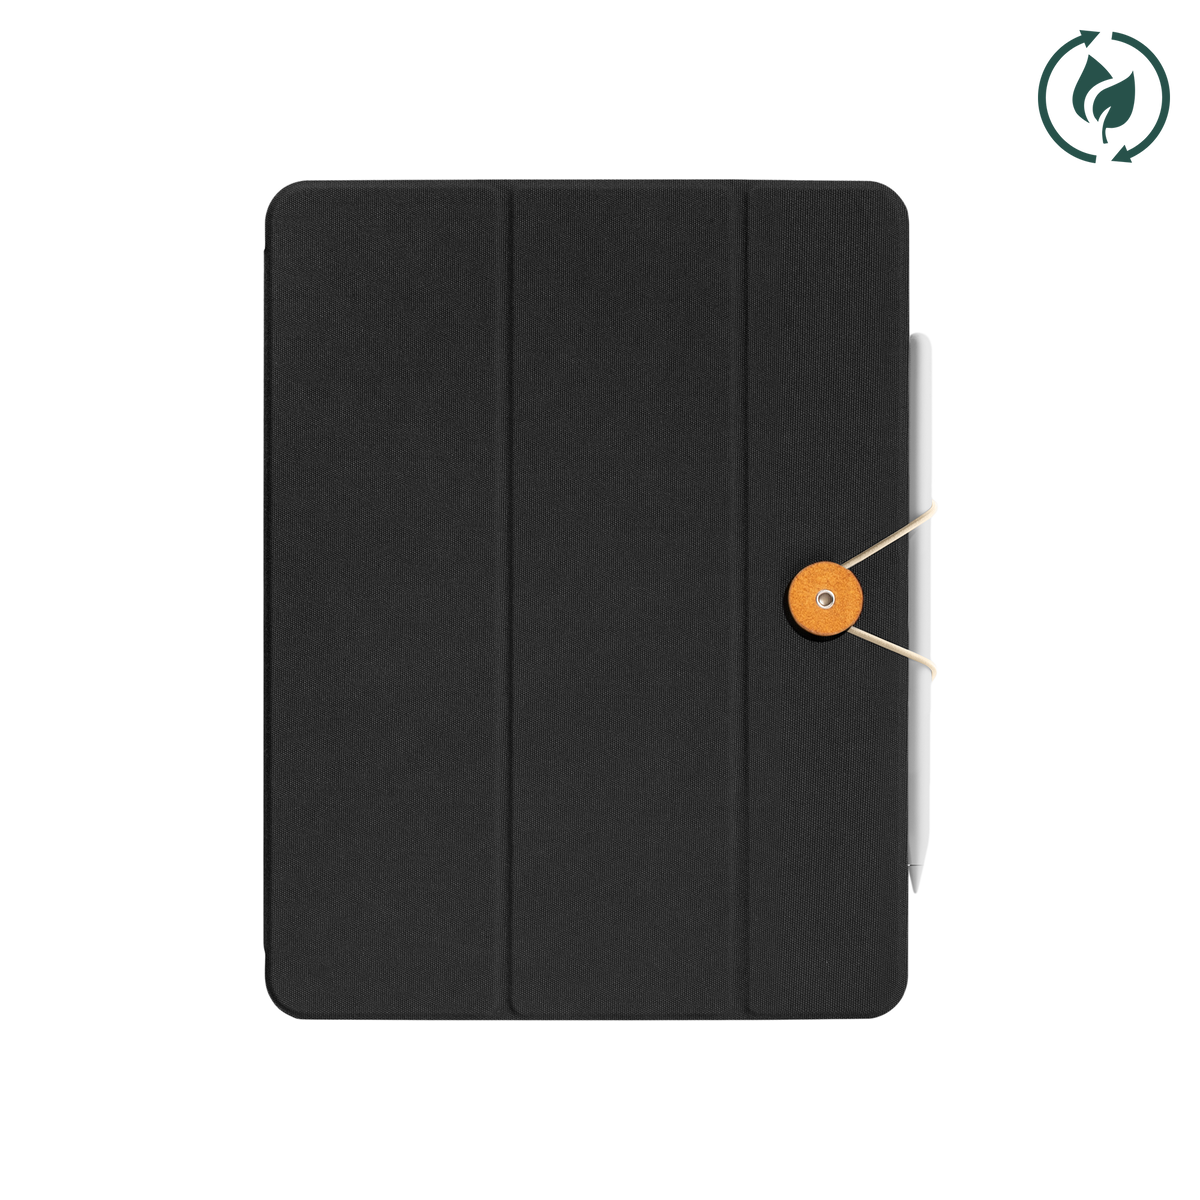 OEM Apple Smart Cover for iPad 9.7 inch 5th & 6th Gen and Air 1